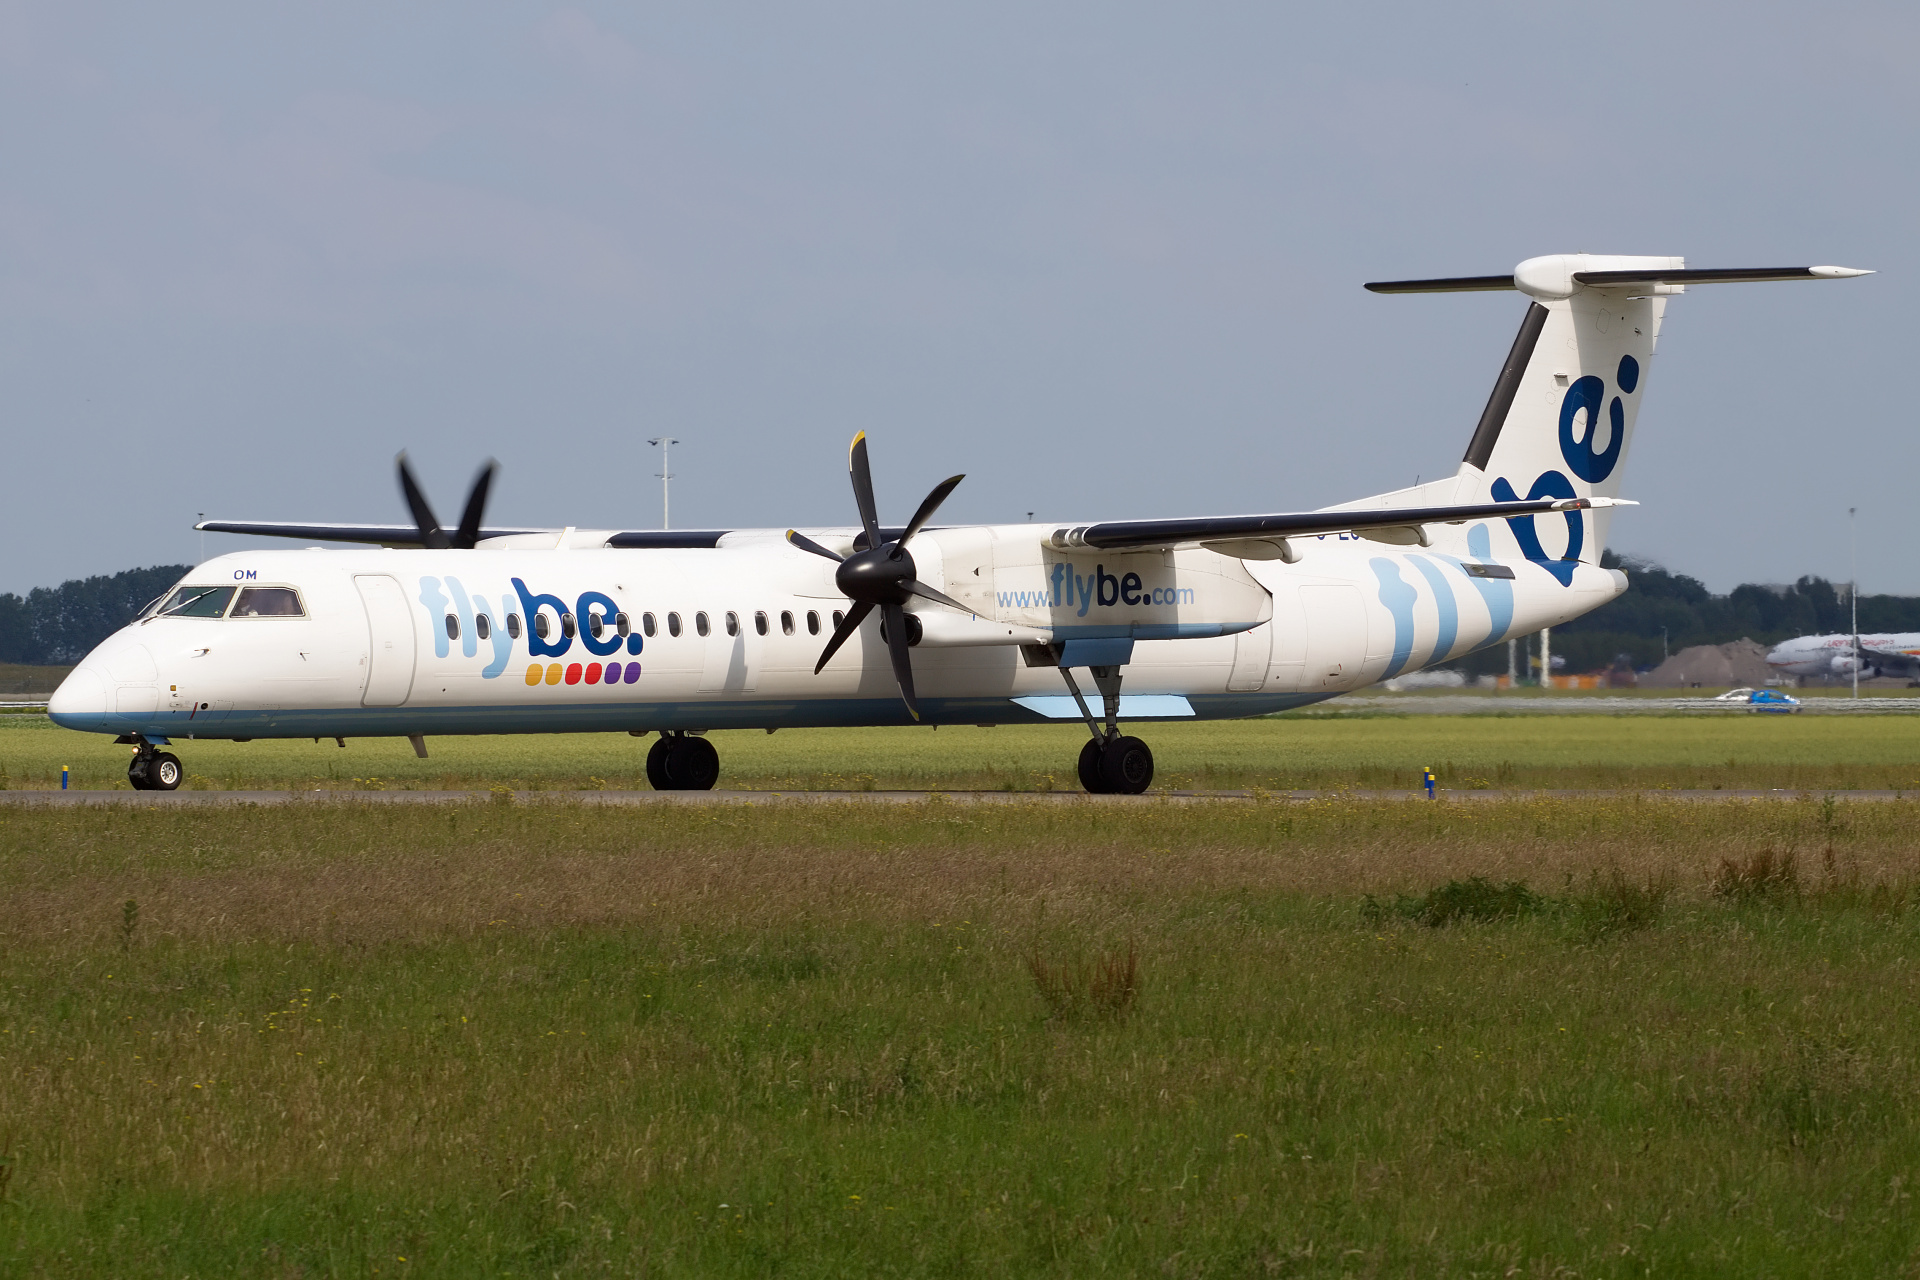 G-ECOM (Aircraft » Schiphol Spotting » Bombardier Q400 Dash 8 » FlyBe)